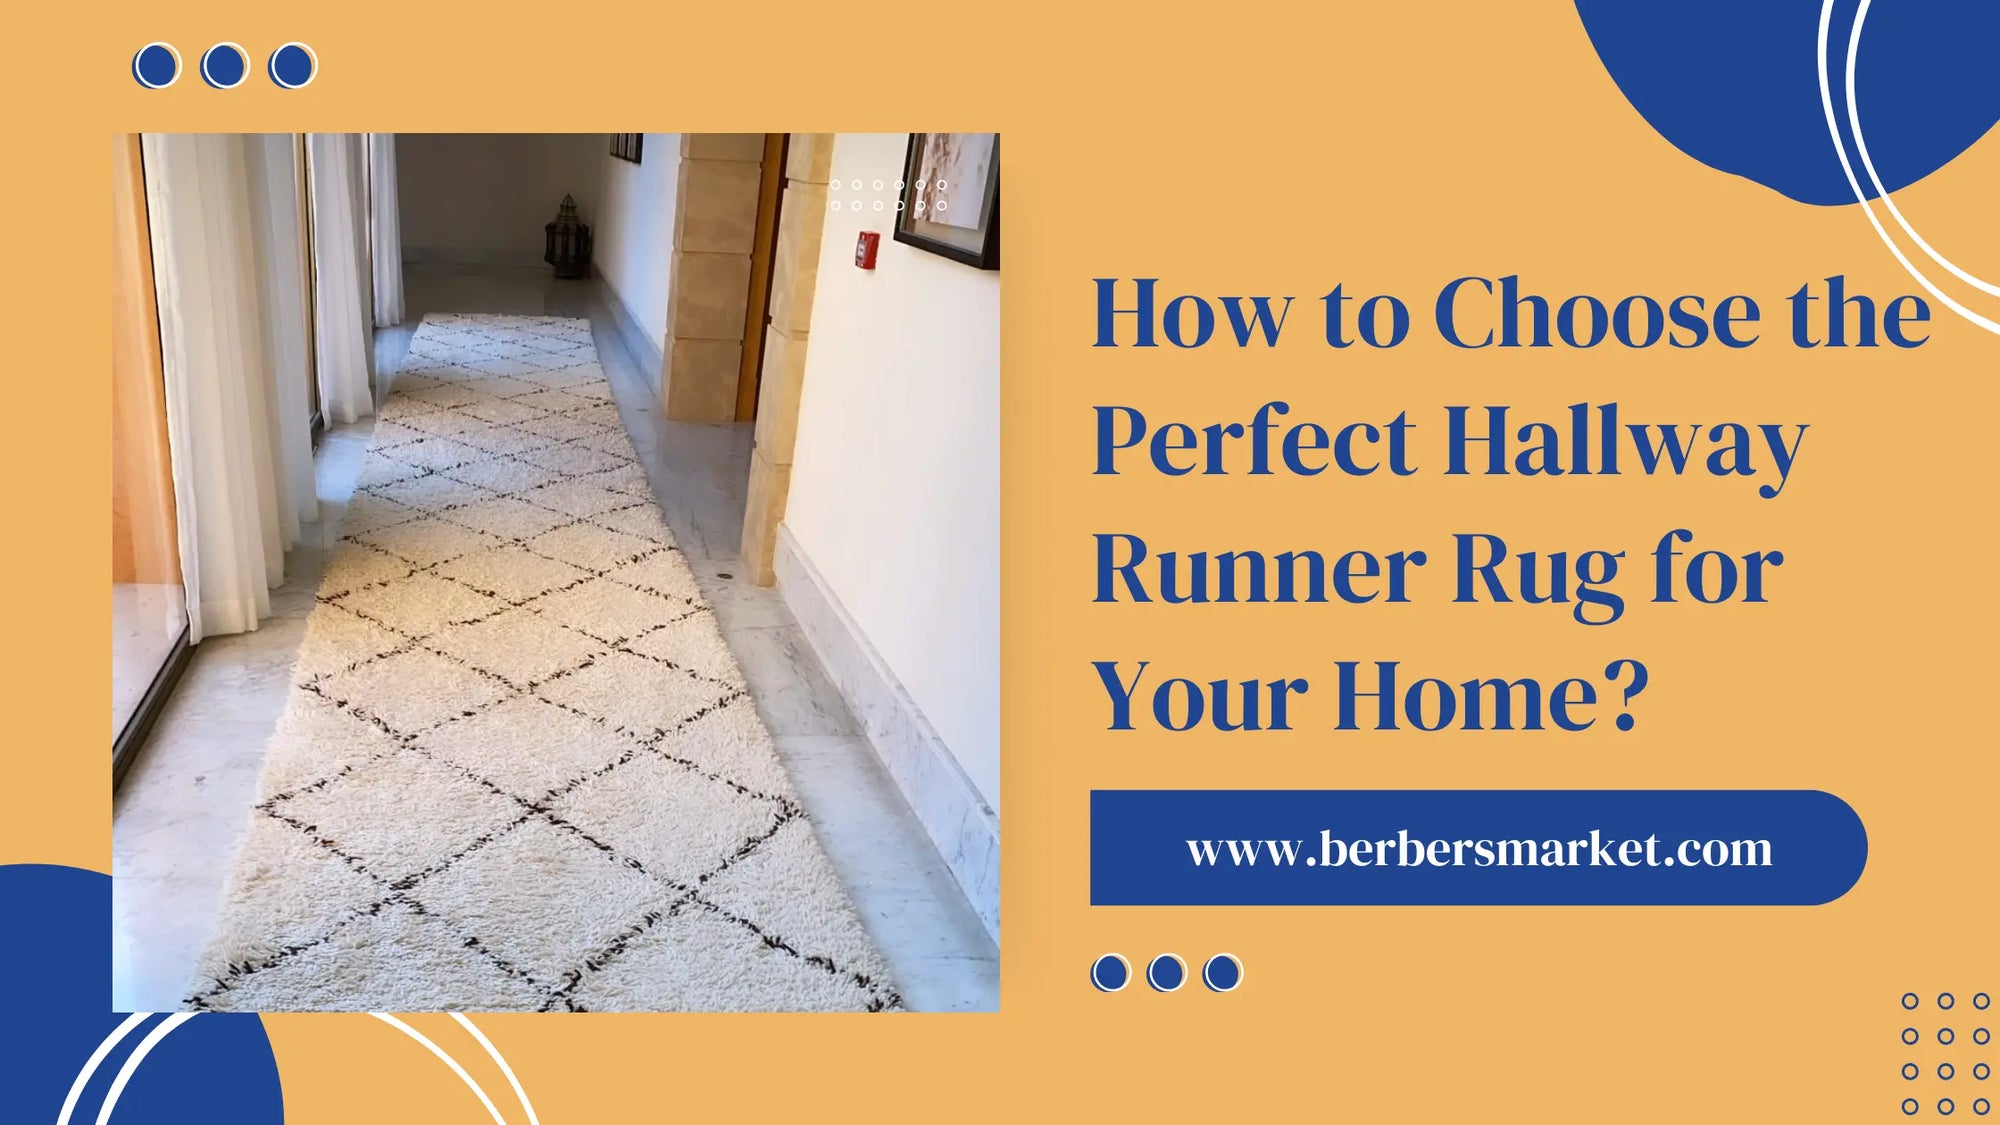 Blog banner talking about: "How to Choose the Perfect Hallway Runner Rug for Your Home?" with a picture showing a Beni ourain Runner rug with a trellis pattern in  a hallway.